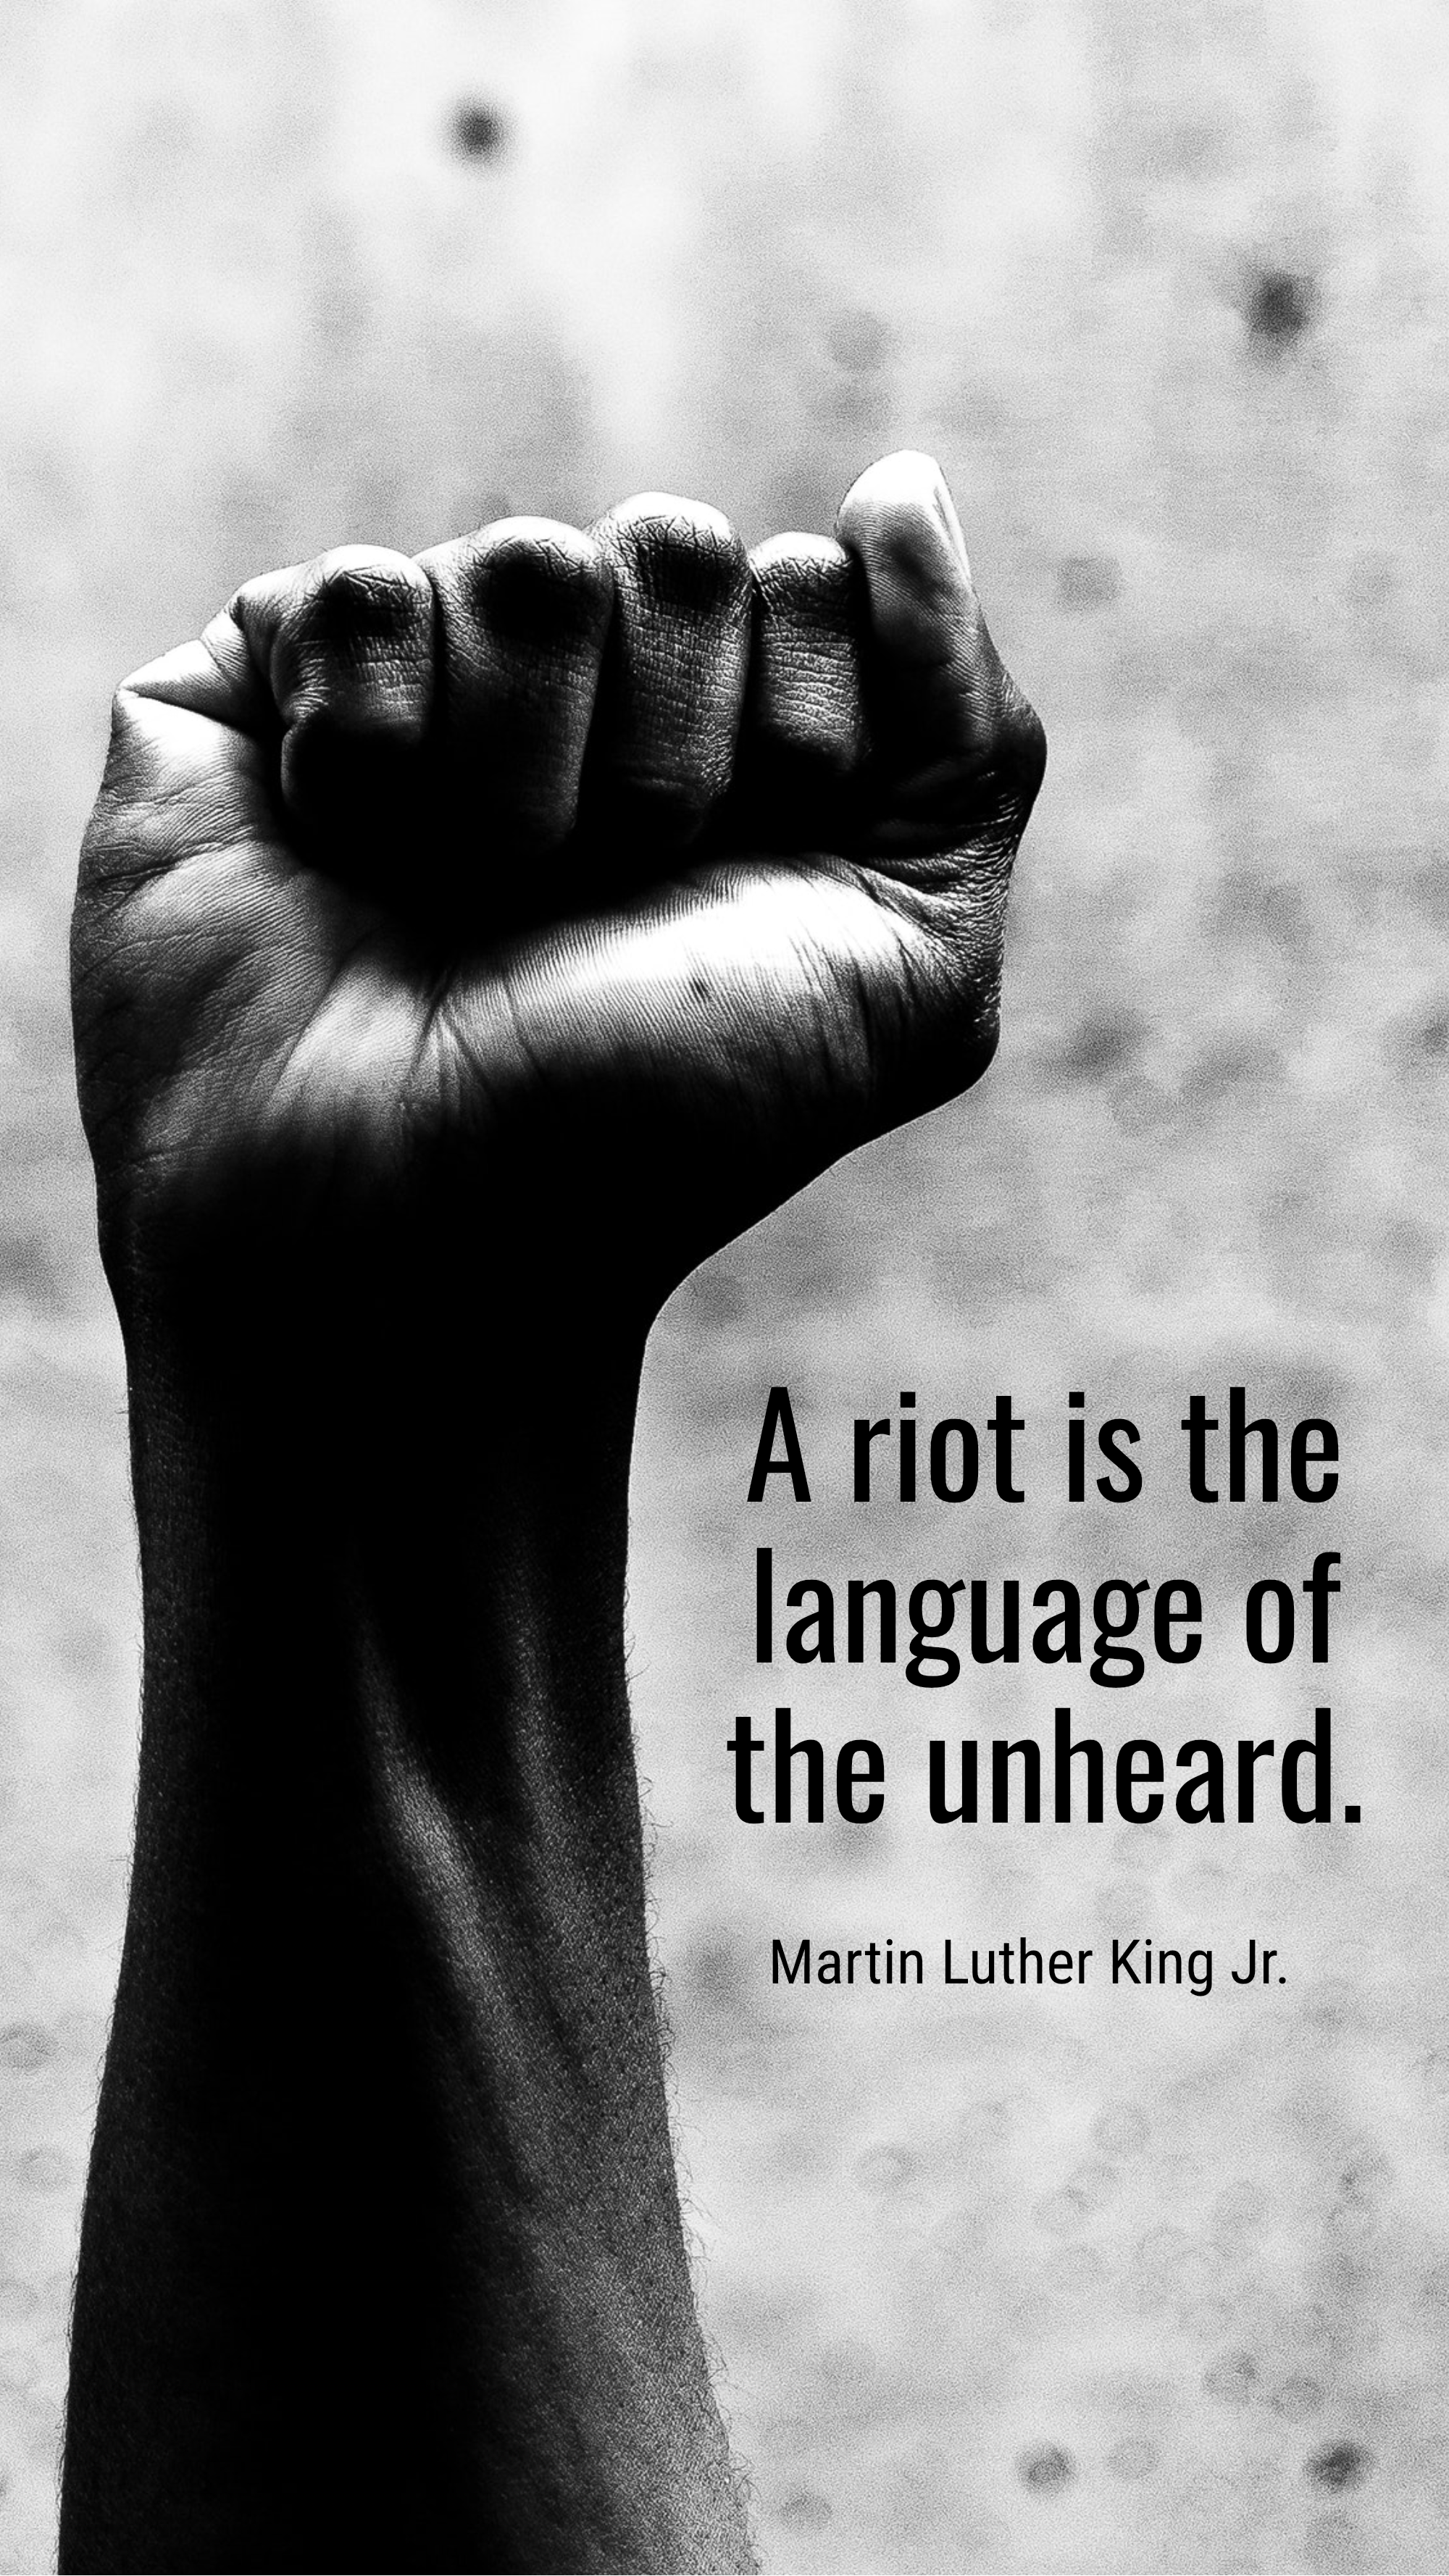 A-riot-is-the-language-of-the-unheard.-Martin-Luther-King-Jr.-Instagram-Story-Template-LVj5prFDOpiKIHPhdTa.png